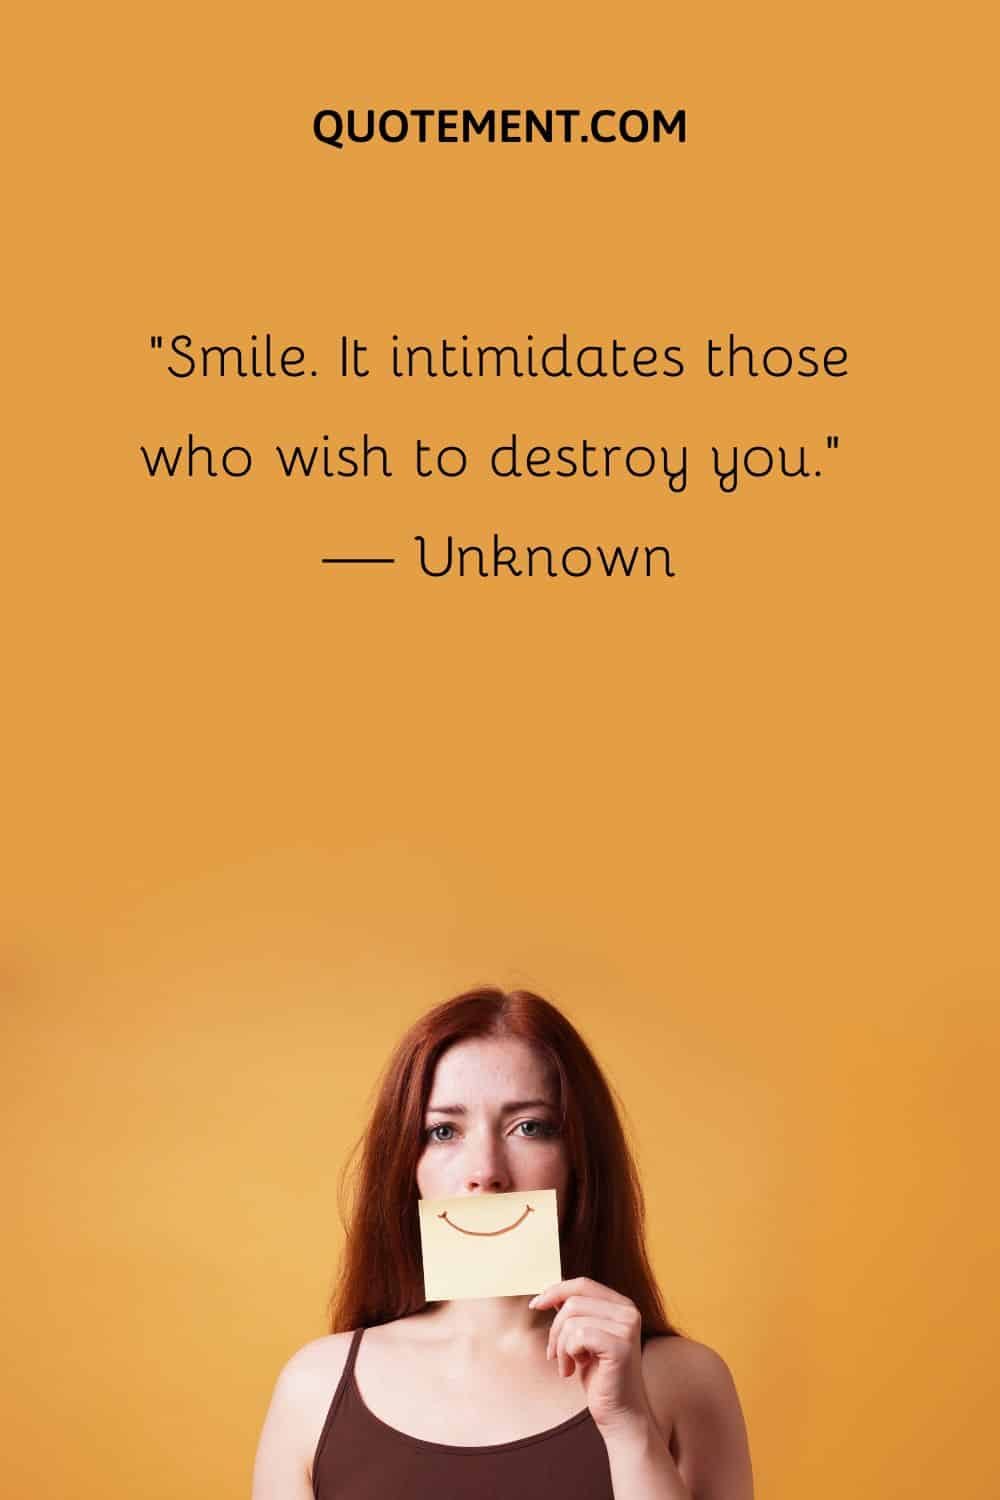 Smile. It intimidates those who wish to destroy you